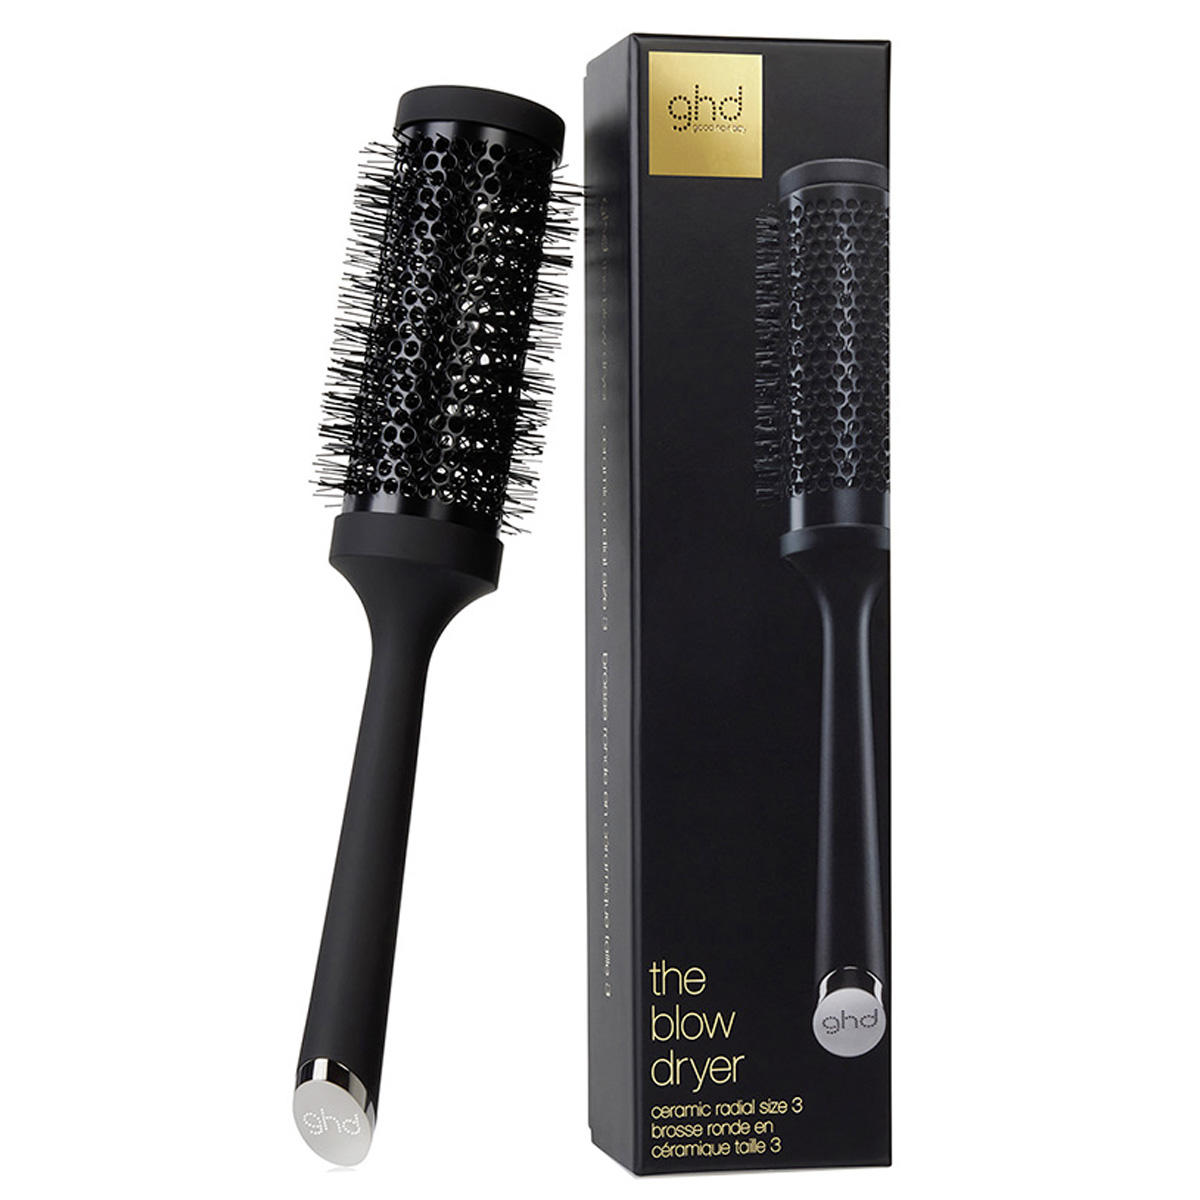 ghd the blow dryer - radial brush Taille 3, Ø 45 mm - 2